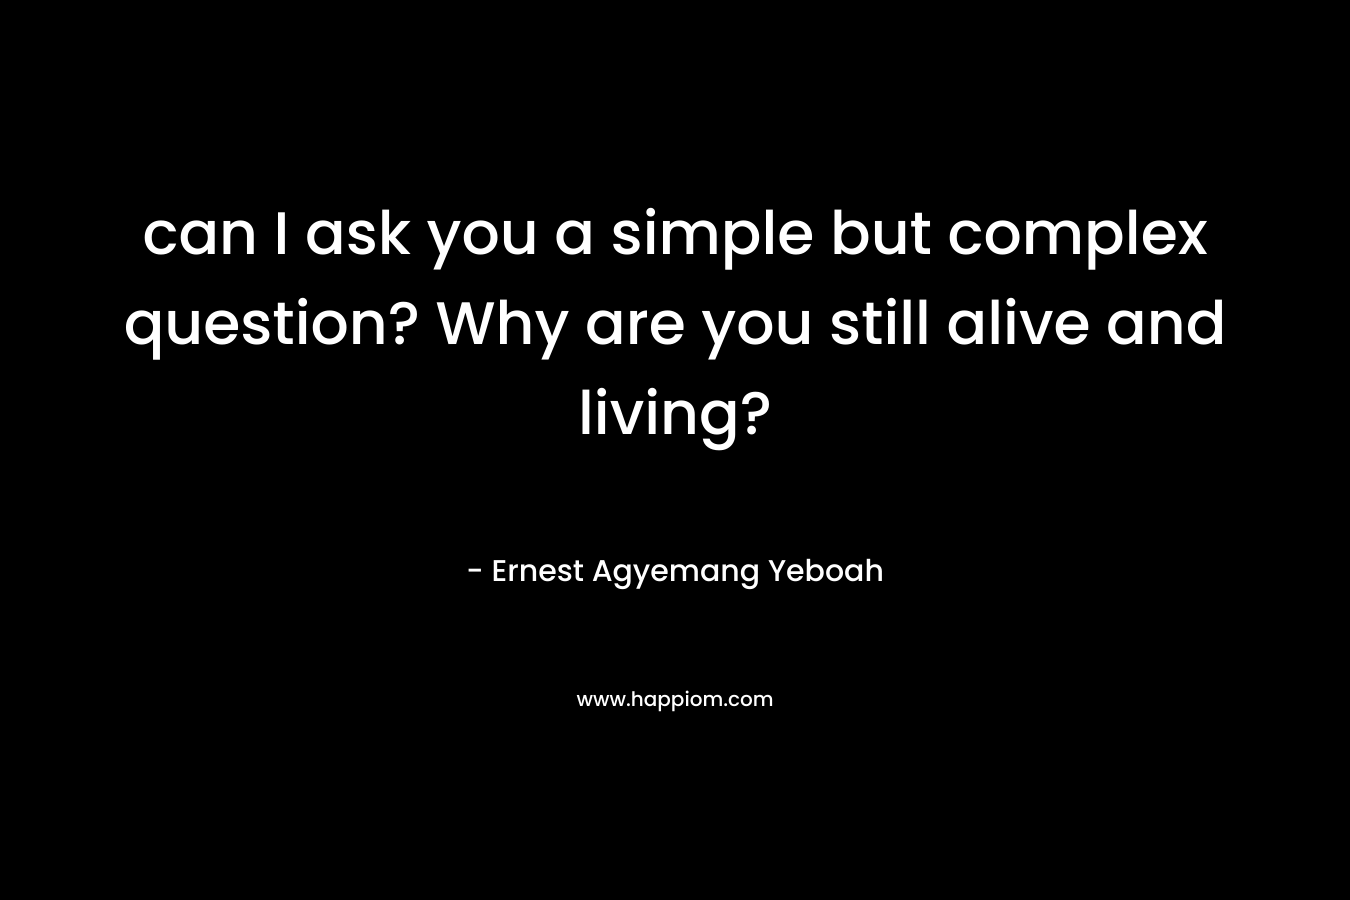 can I ask you a simple but complex question? Why are you still alive and living?